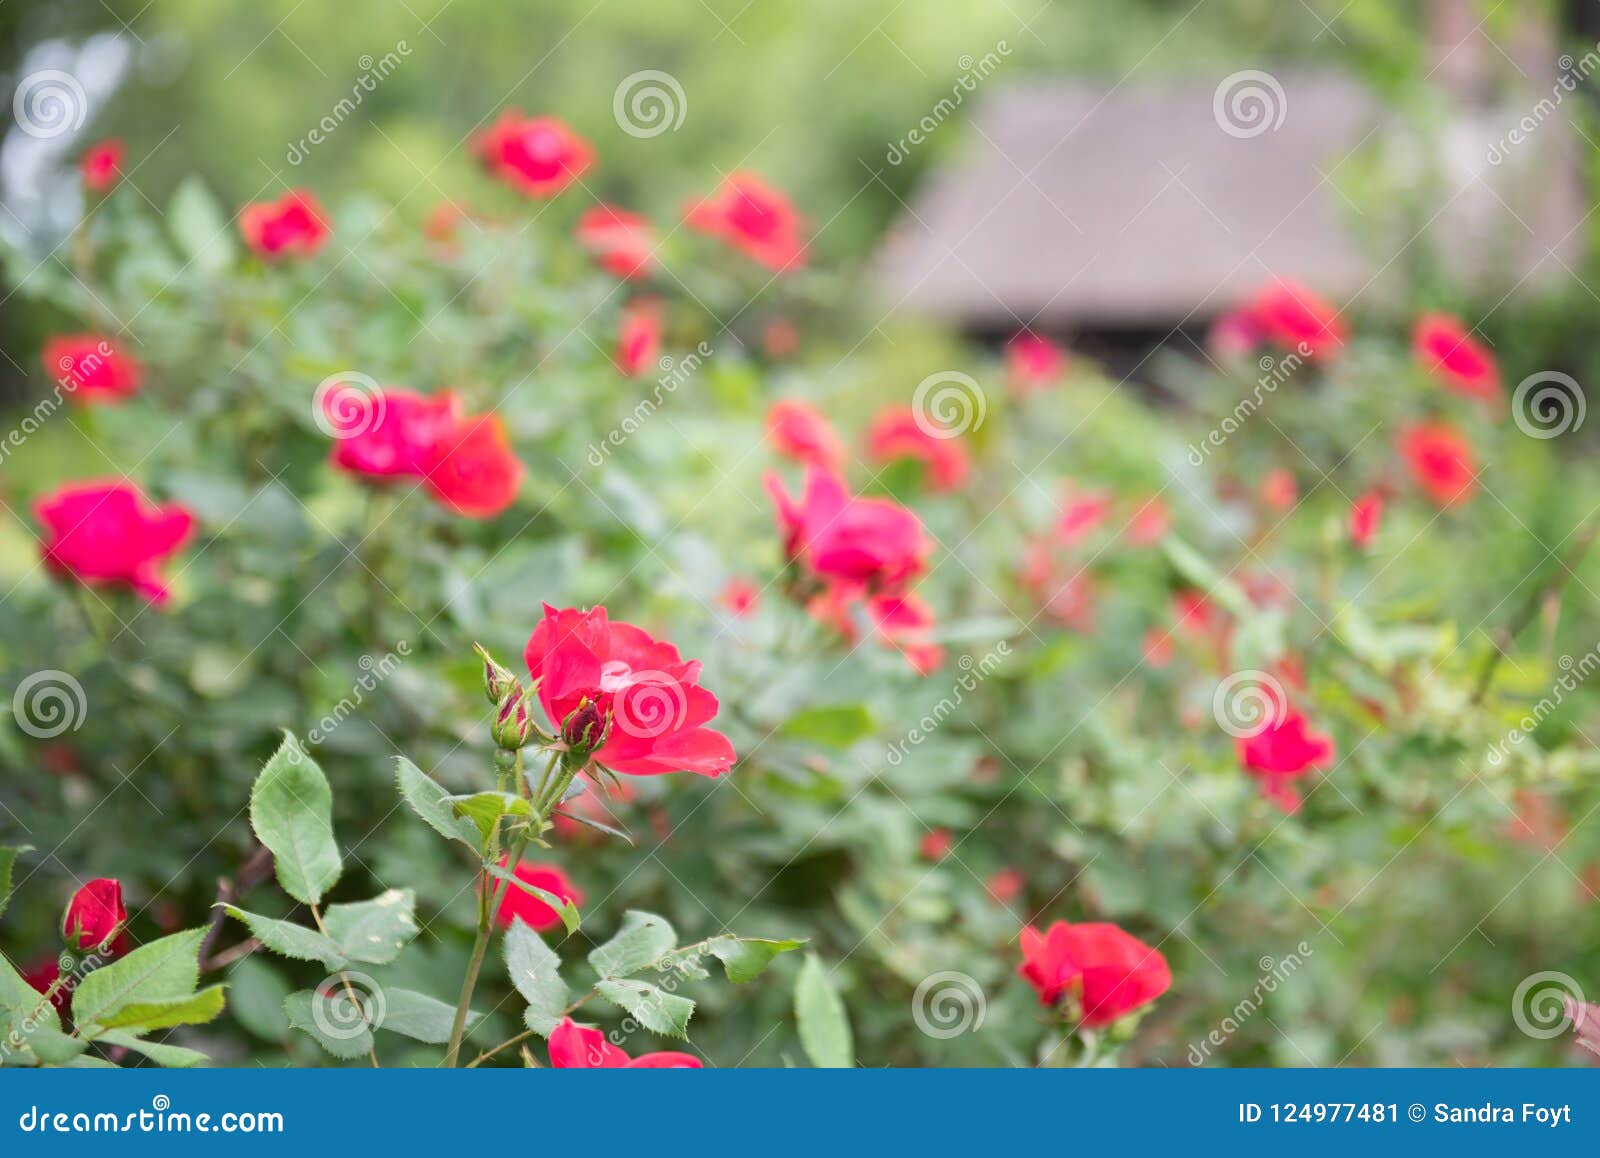 Red Country Roses And Barn Background Stock Image - Image ...